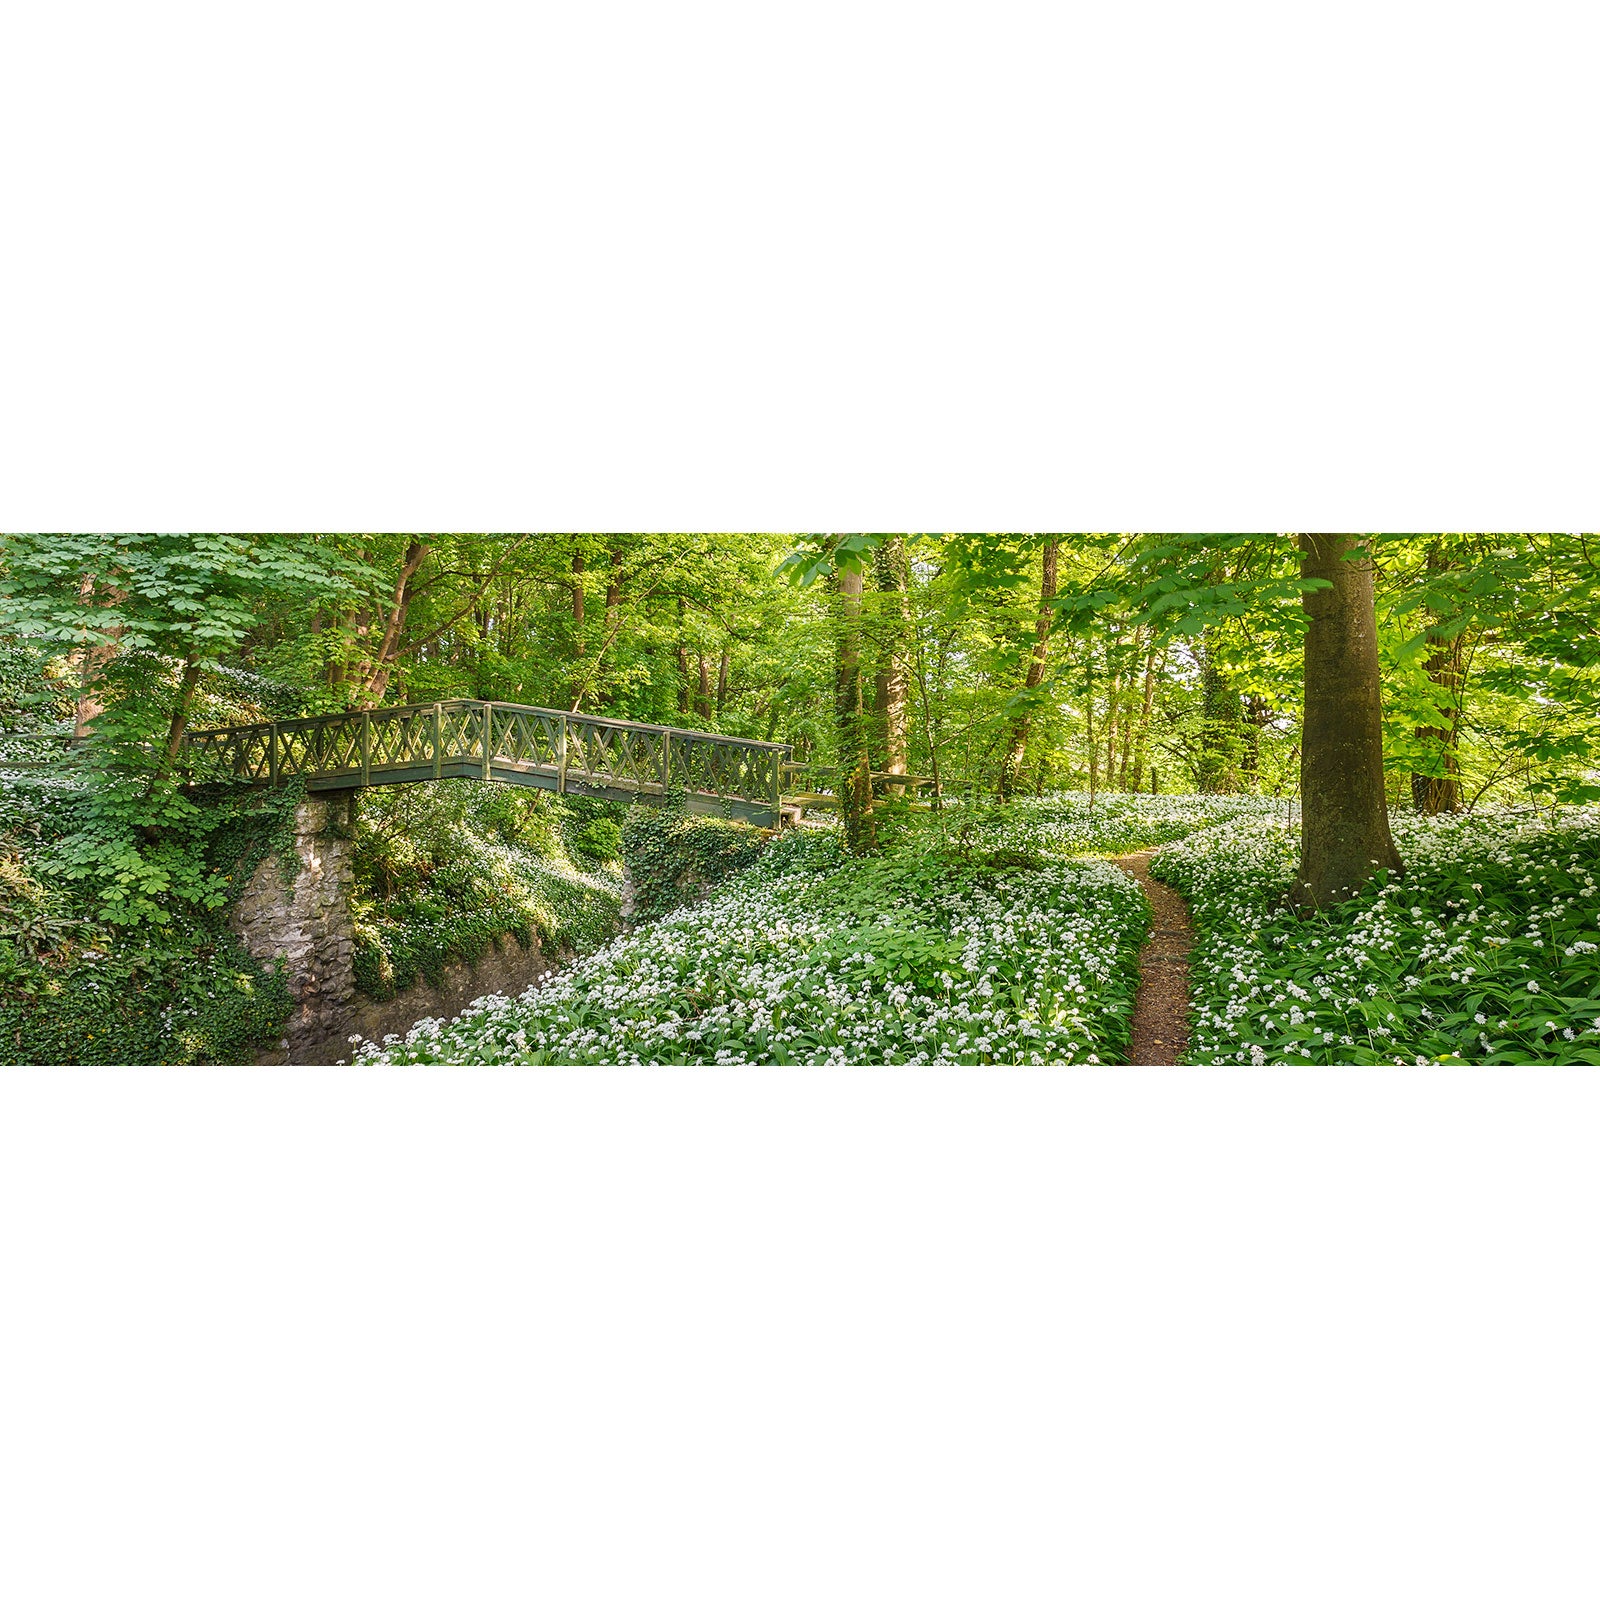 A tranquil Shorwell Shute footbridge over a stream amidst a carpet of white wildflowers and lush green trees on the Isle of Gascoigne by Available Light Photography.